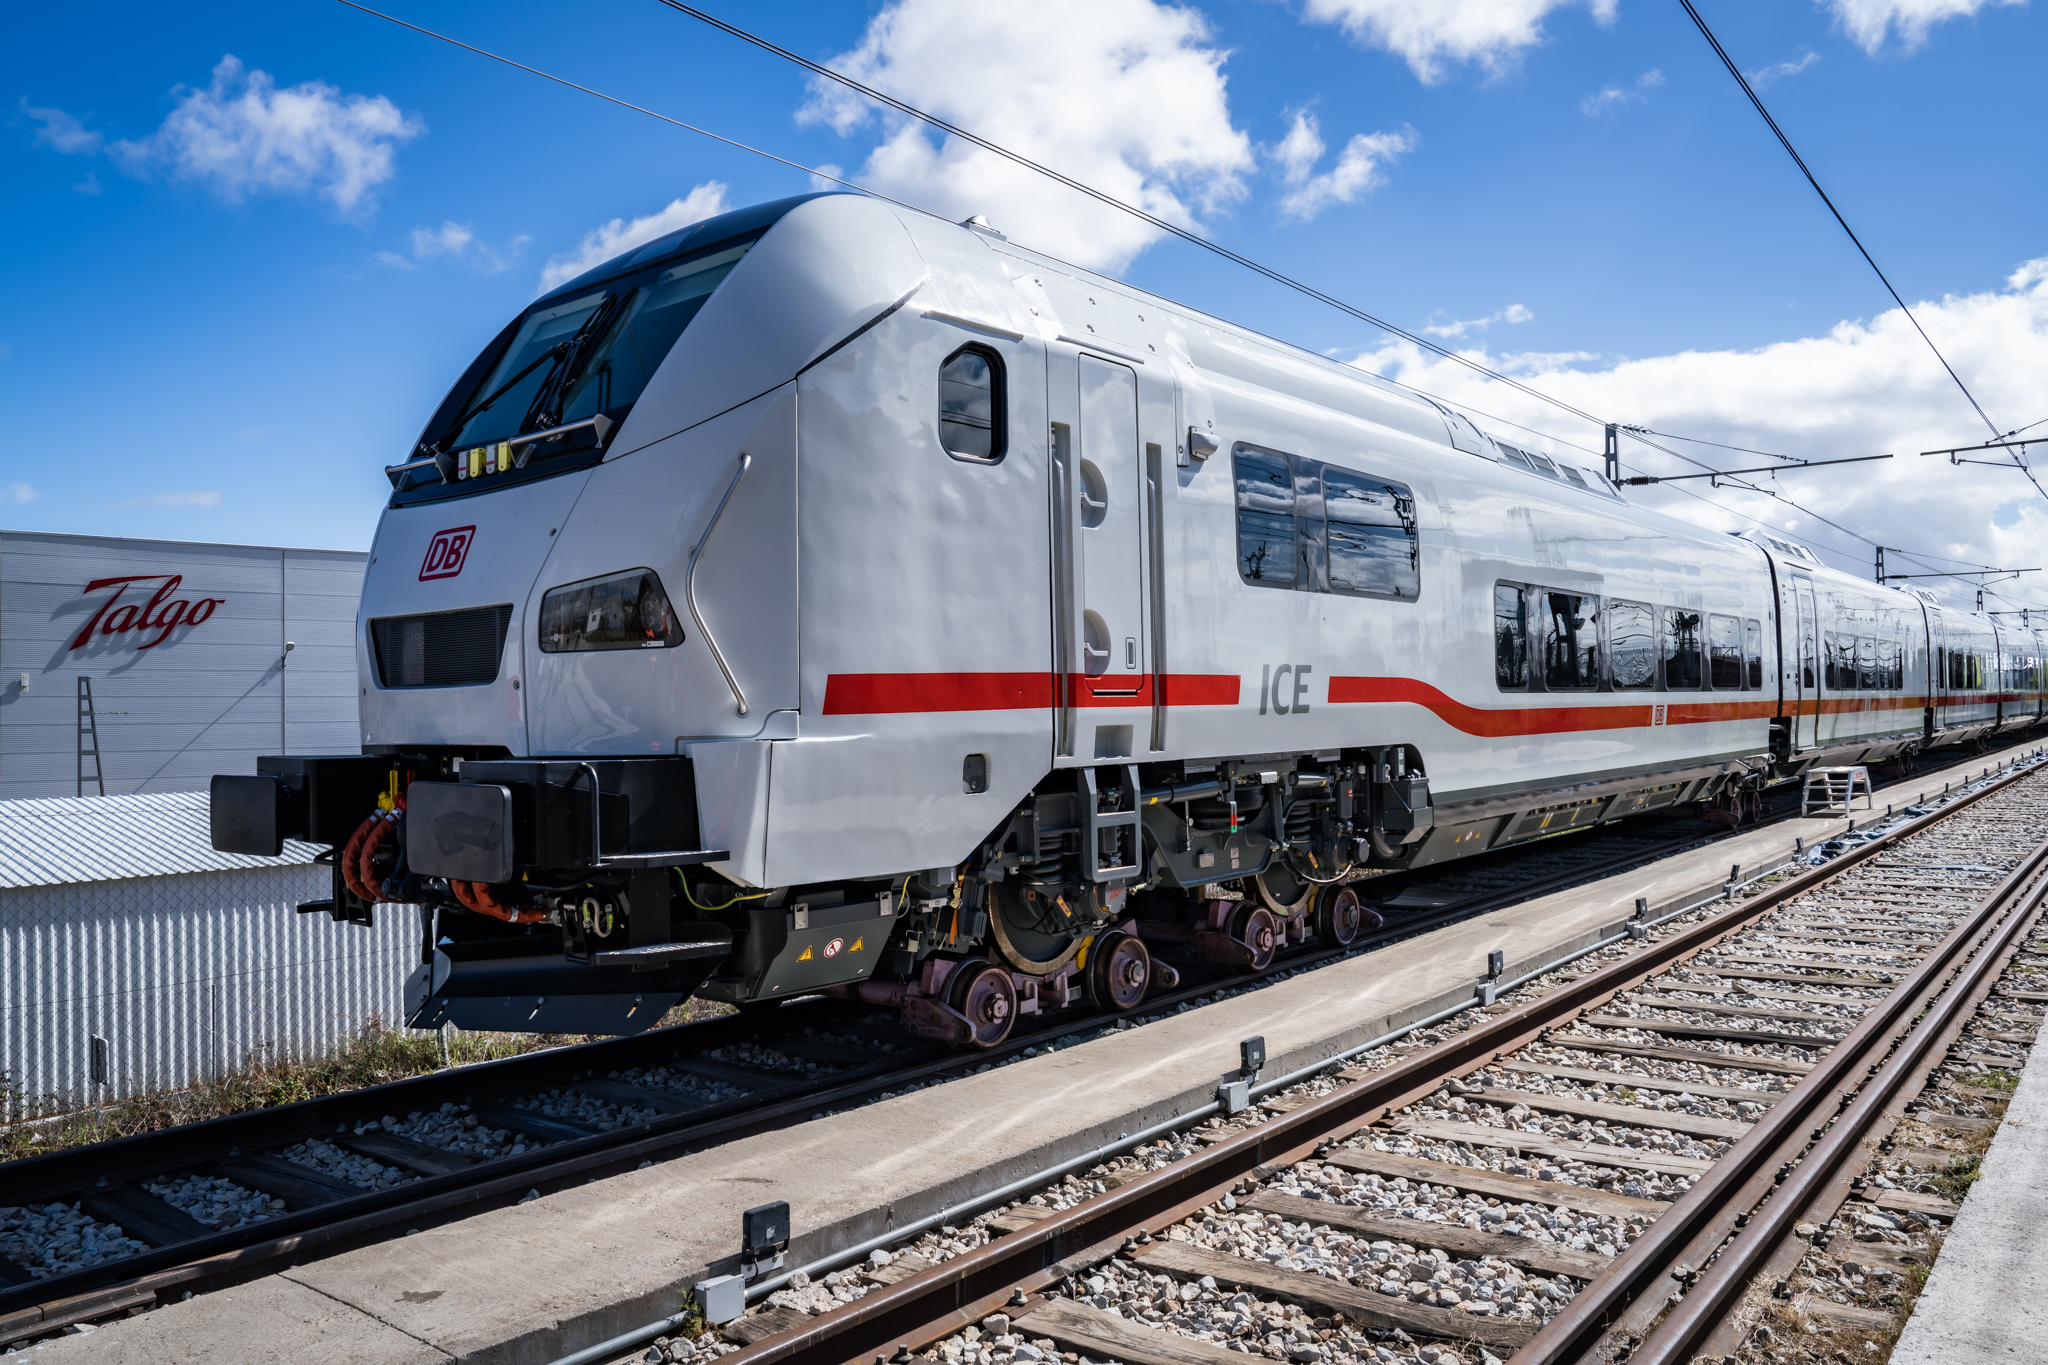 DB's ICE L train, manufactured by Talgo